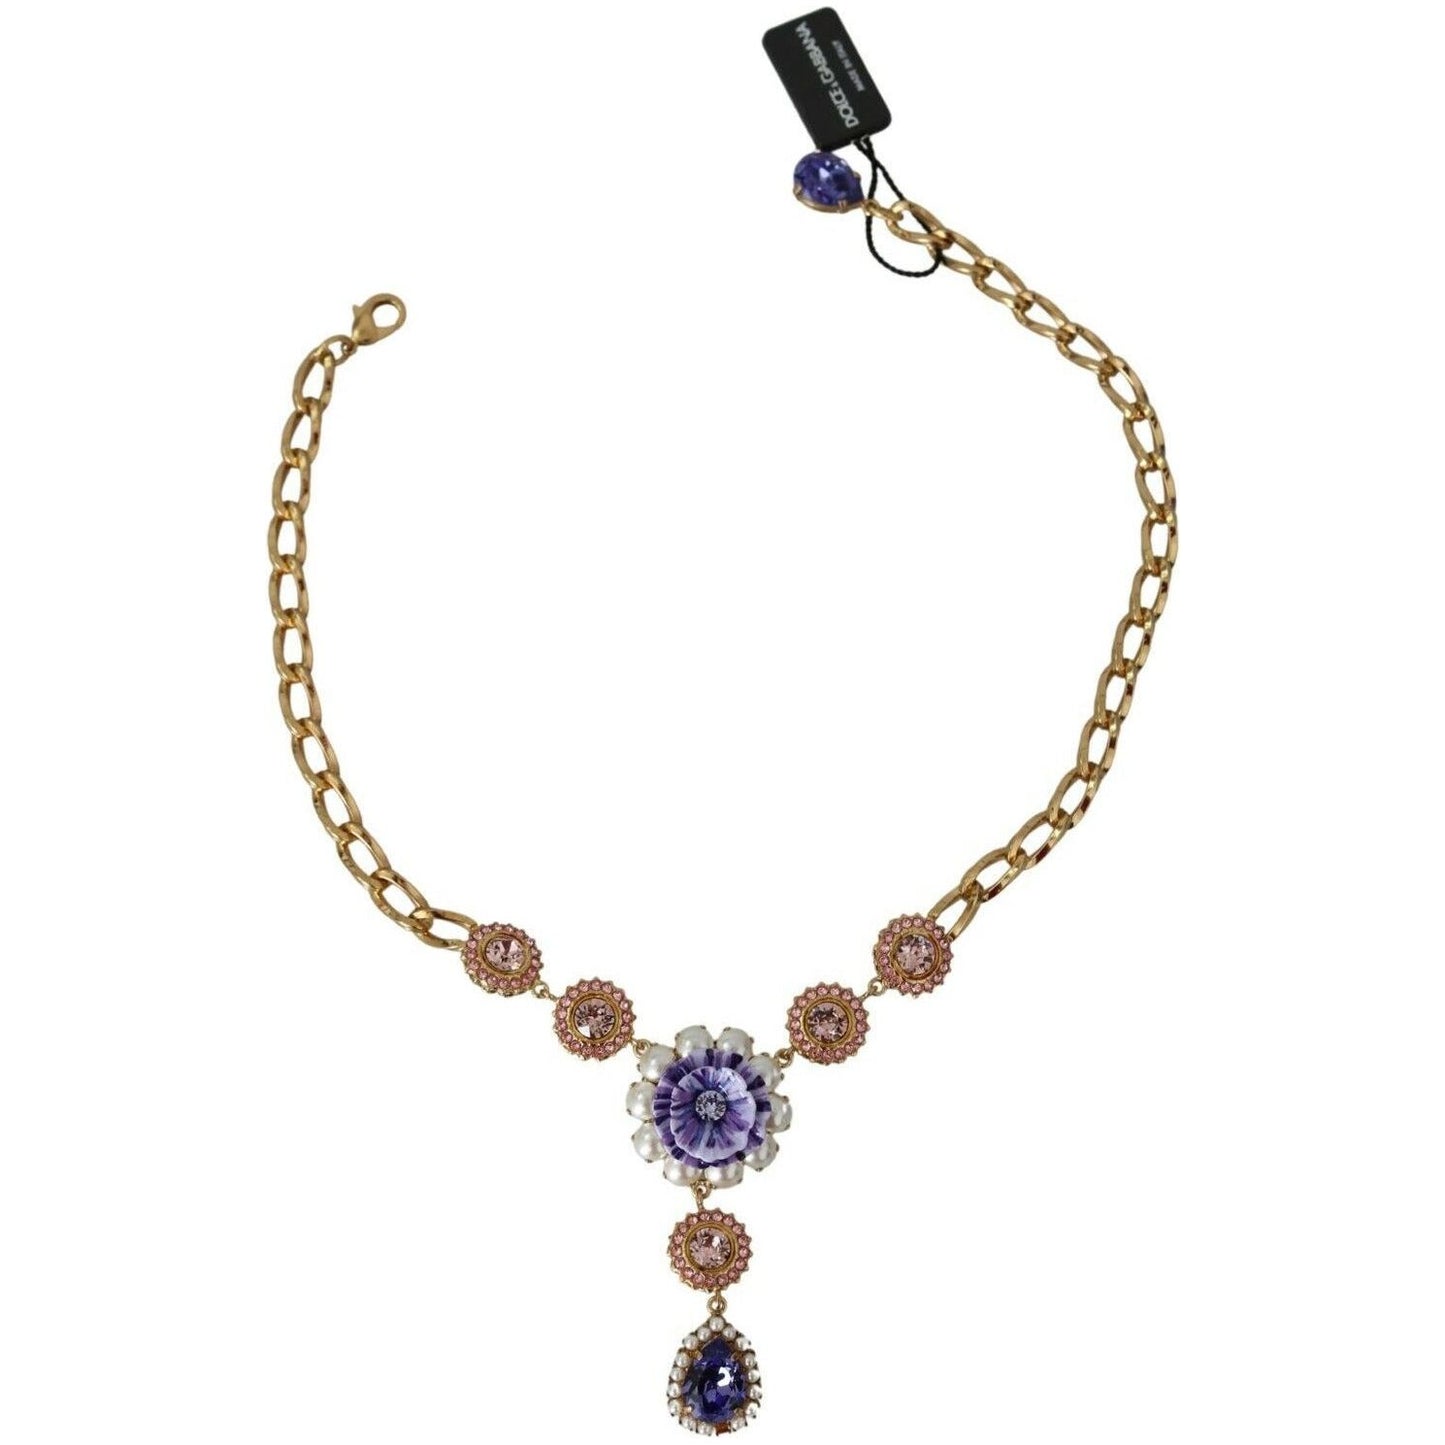 Dolce & Gabbana Elegant Gold Crystal Floral Charm Necklace pink-gold-brass-crystal-purple-pearl-pendants WOMAN NECKLACE s-l1600-2022-10-06T154020.405-feedad69-85f.jpg